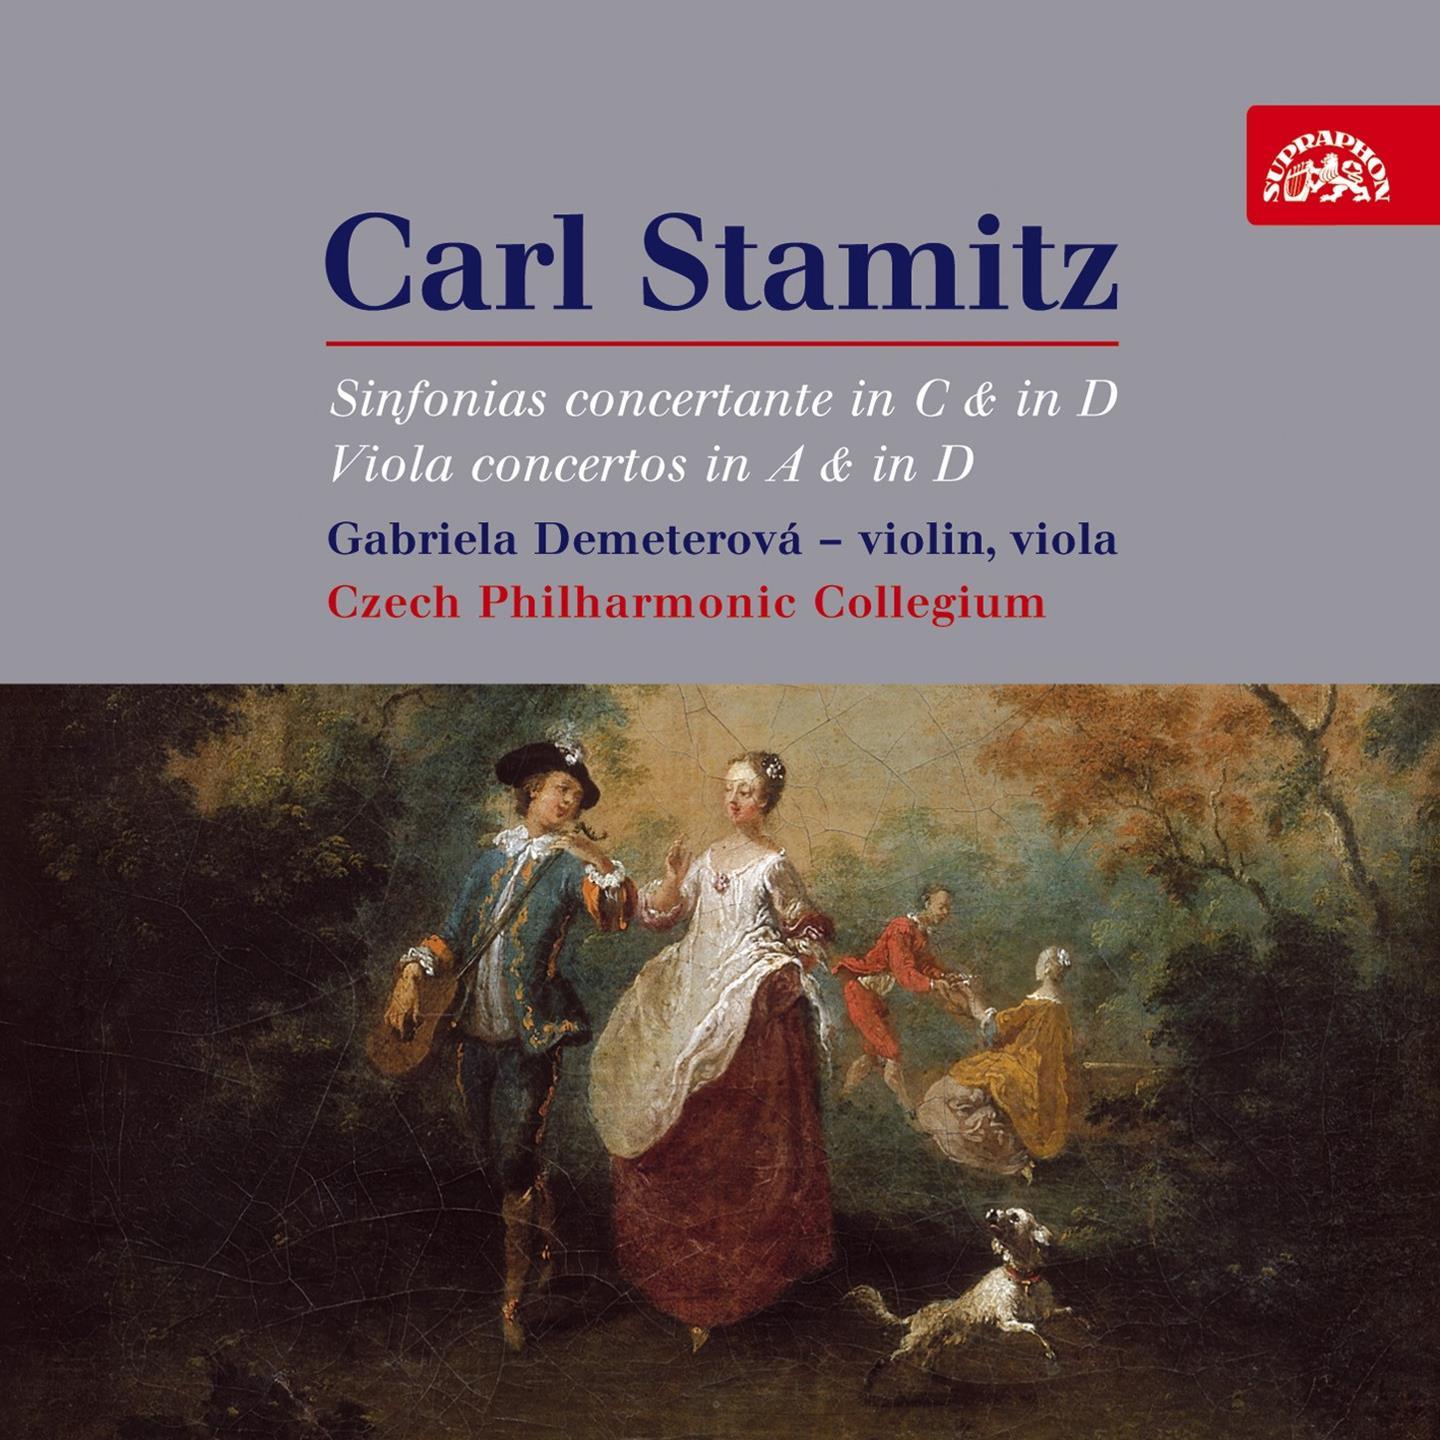 Concerto for Viola and Orchestra in D Major, Op. 1: II. Andante moderato